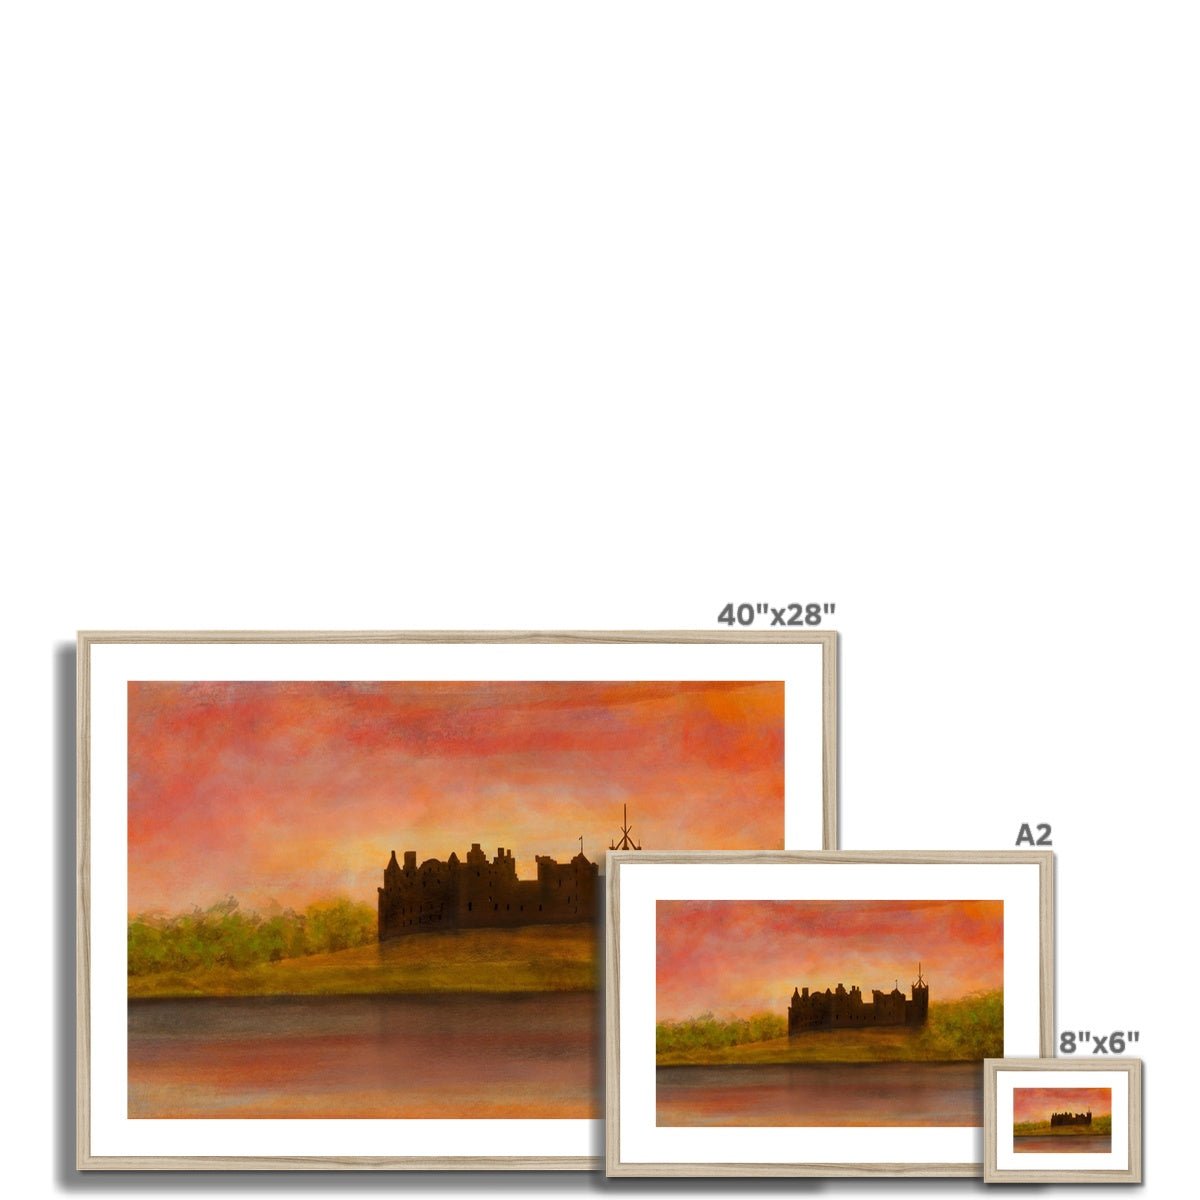 Linlithgow Palace Dusk Painting | Framed & Mounted Prints From Scotland-Framed & Mounted Prints-Historic & Iconic Scotland Art Gallery-Paintings, Prints, Homeware, Art Gifts From Scotland By Scottish Artist Kevin Hunter